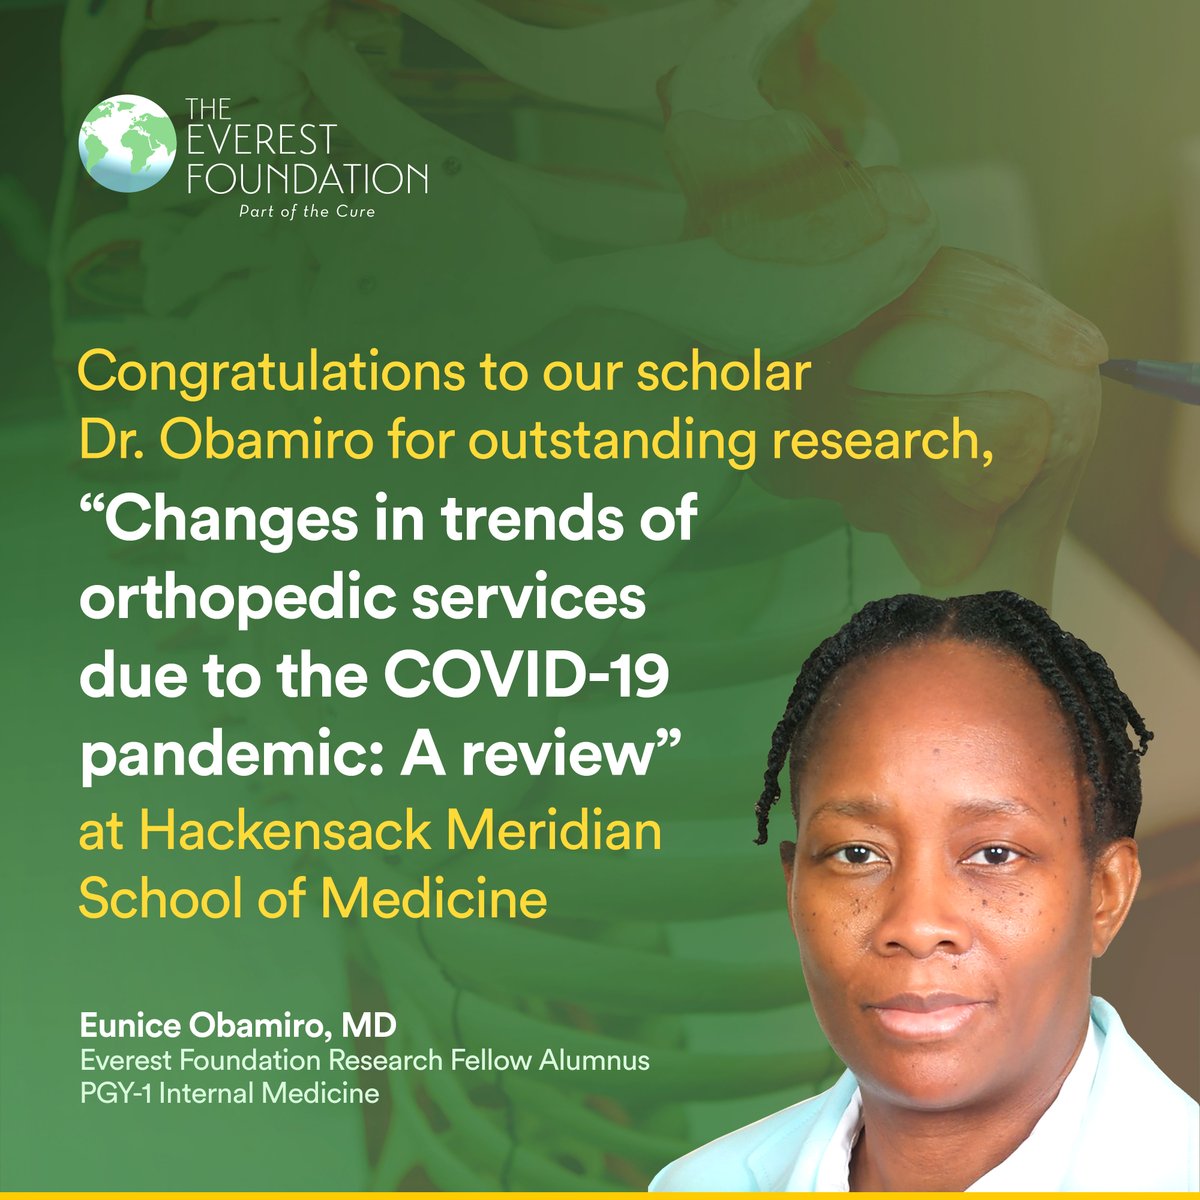 The pandemic altered the nature of patient injuries & outcomes. This publication investigated how #COVID19 affected orthopedic procedures. We are pleased to support Dr. Eunice in her research, publication & residency. #congrats #match2023 #NonUSIMG #USIMG #internalmedicine #PGY1